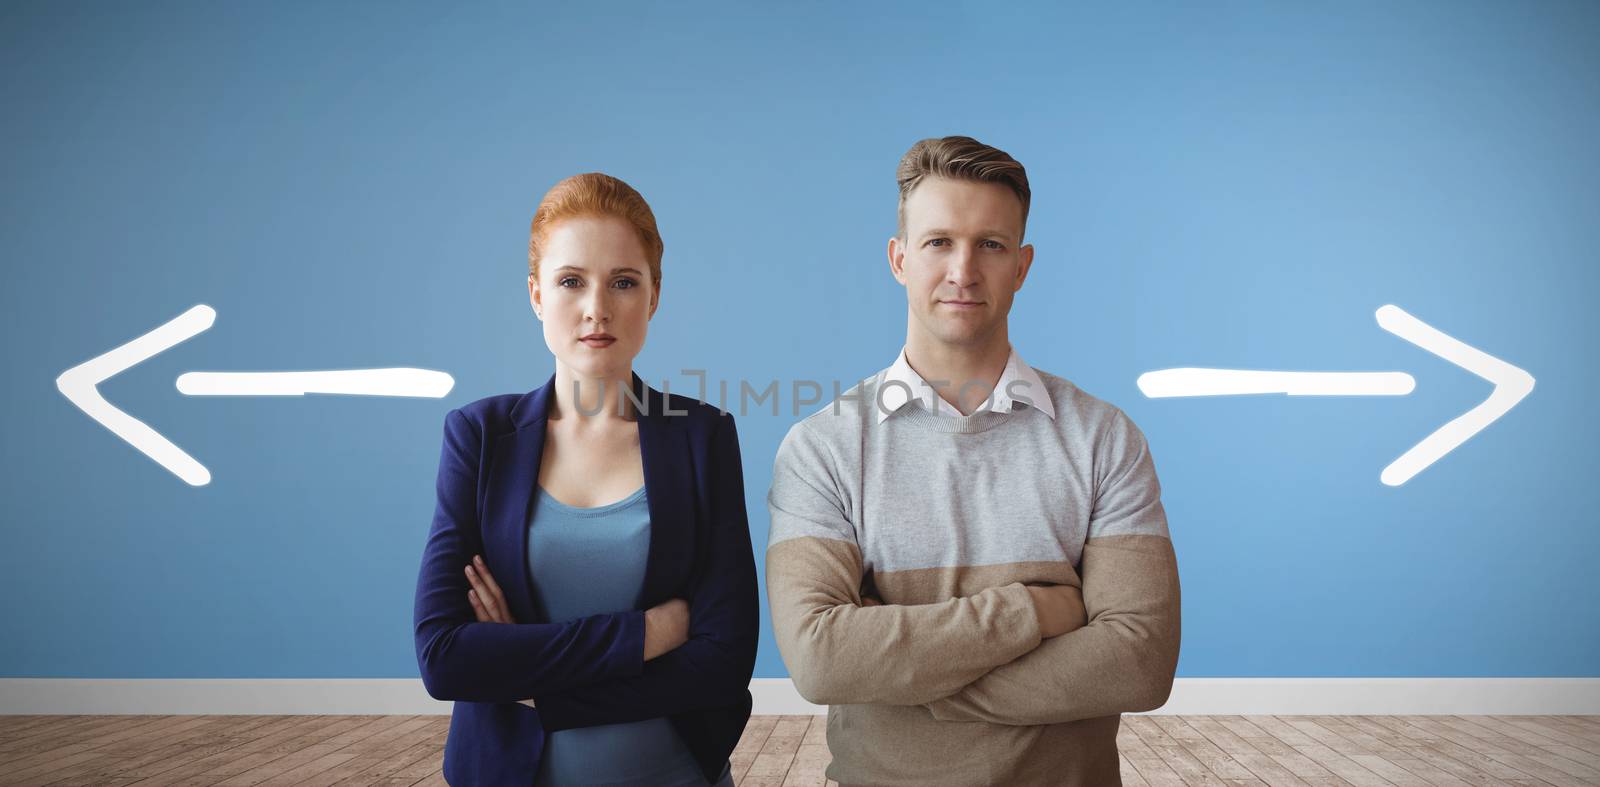 Business people looking at camera against room with wooden floor